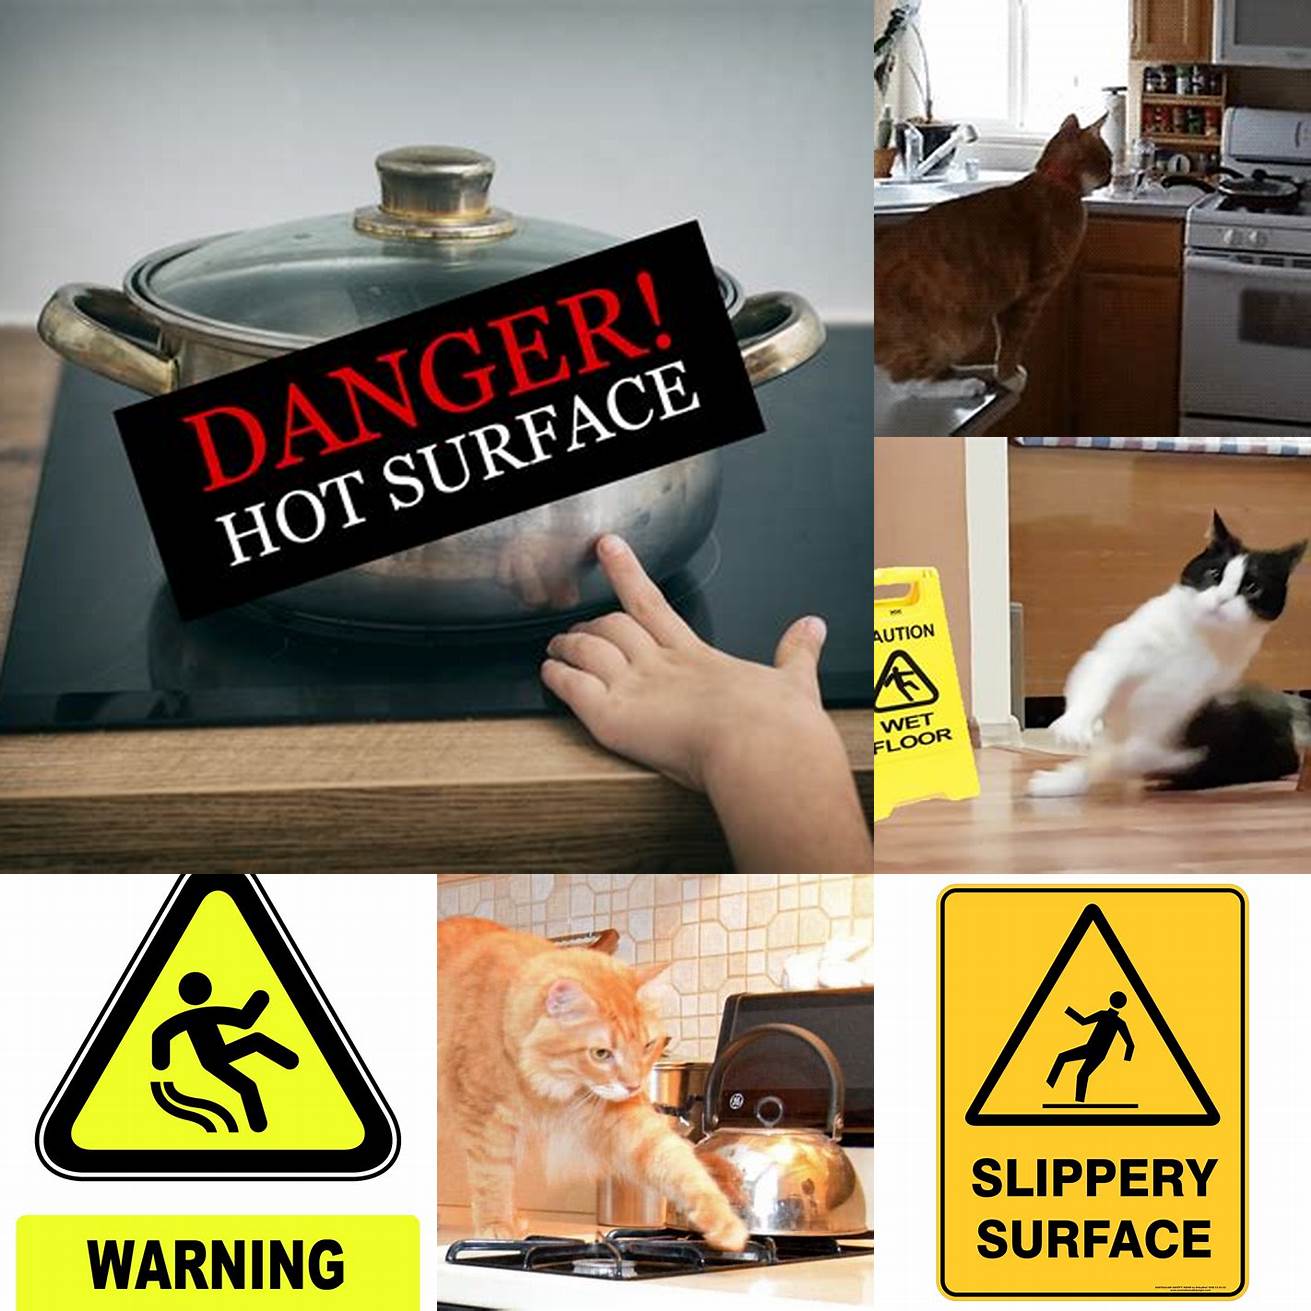 Slippery Surface - Cats may slip on a stove surface and accidentally touch a hot burner